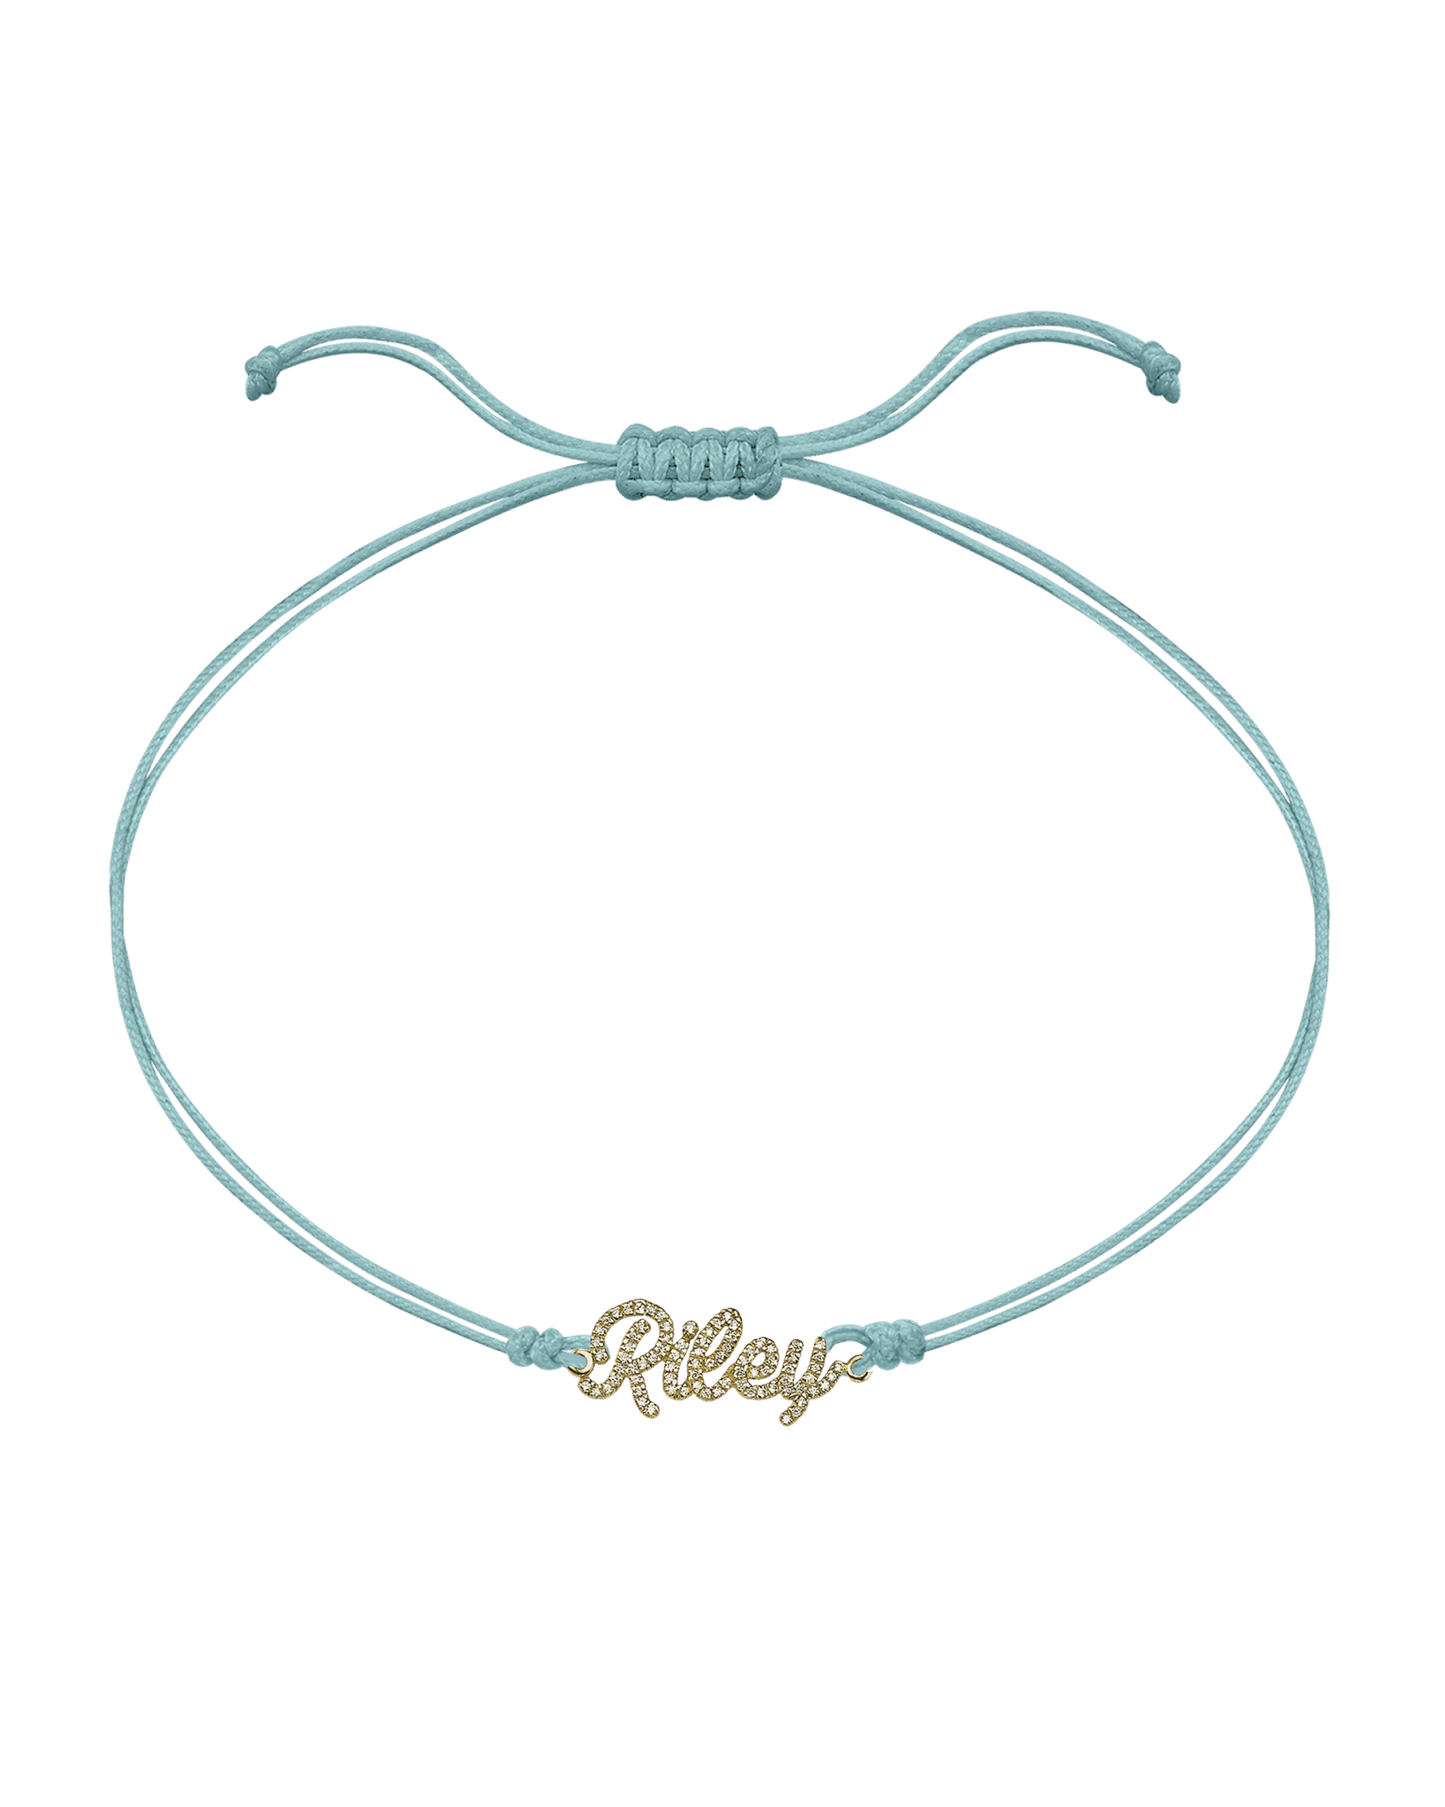 Paved Name Plate String of Love - 14K Yellow Gold Bracelet 14K Solid Gold Turquoise 1 